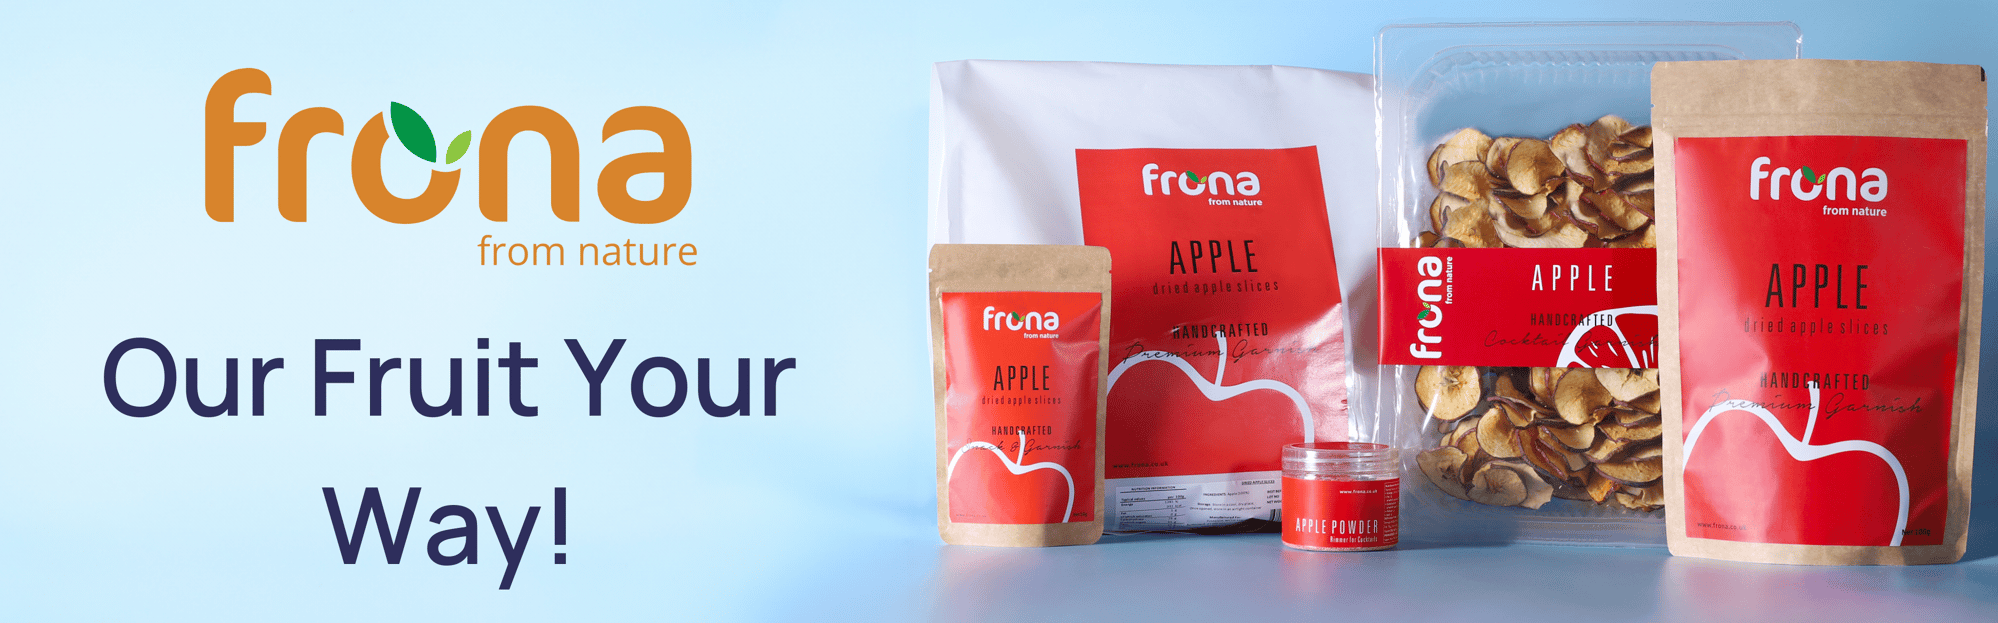 Frona - Our Fruit Your Way